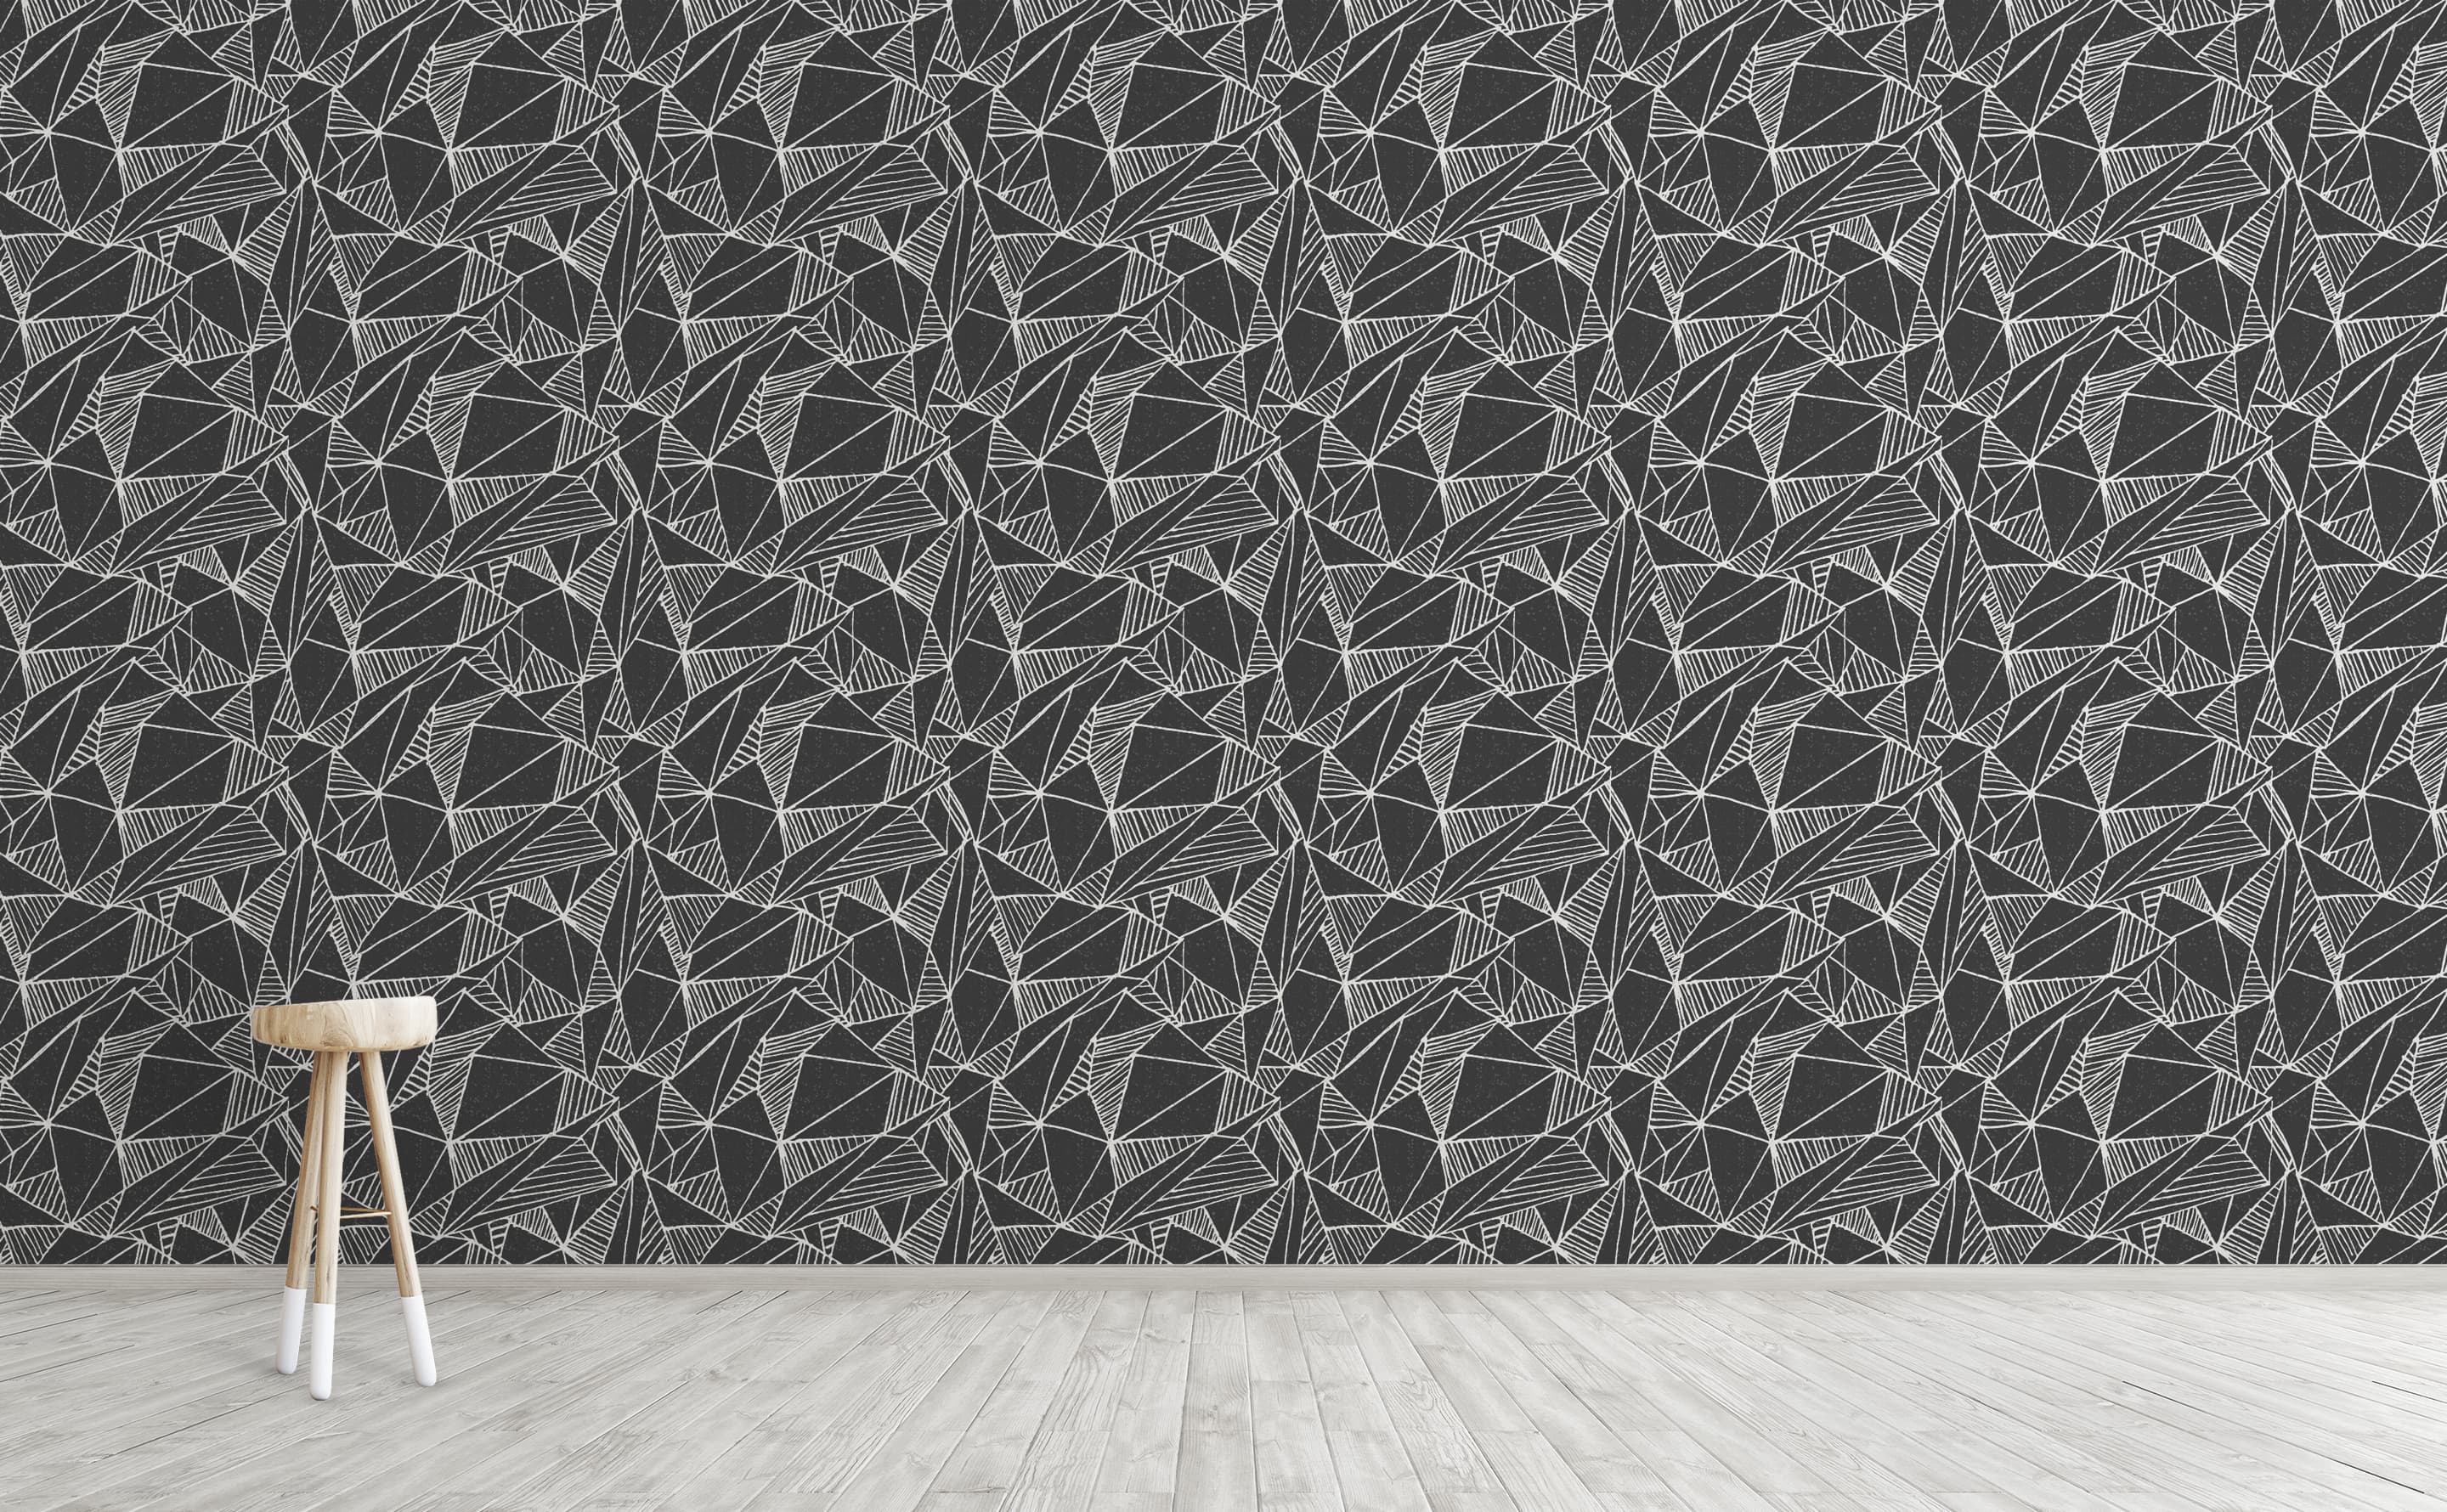 black and white abstract pattern